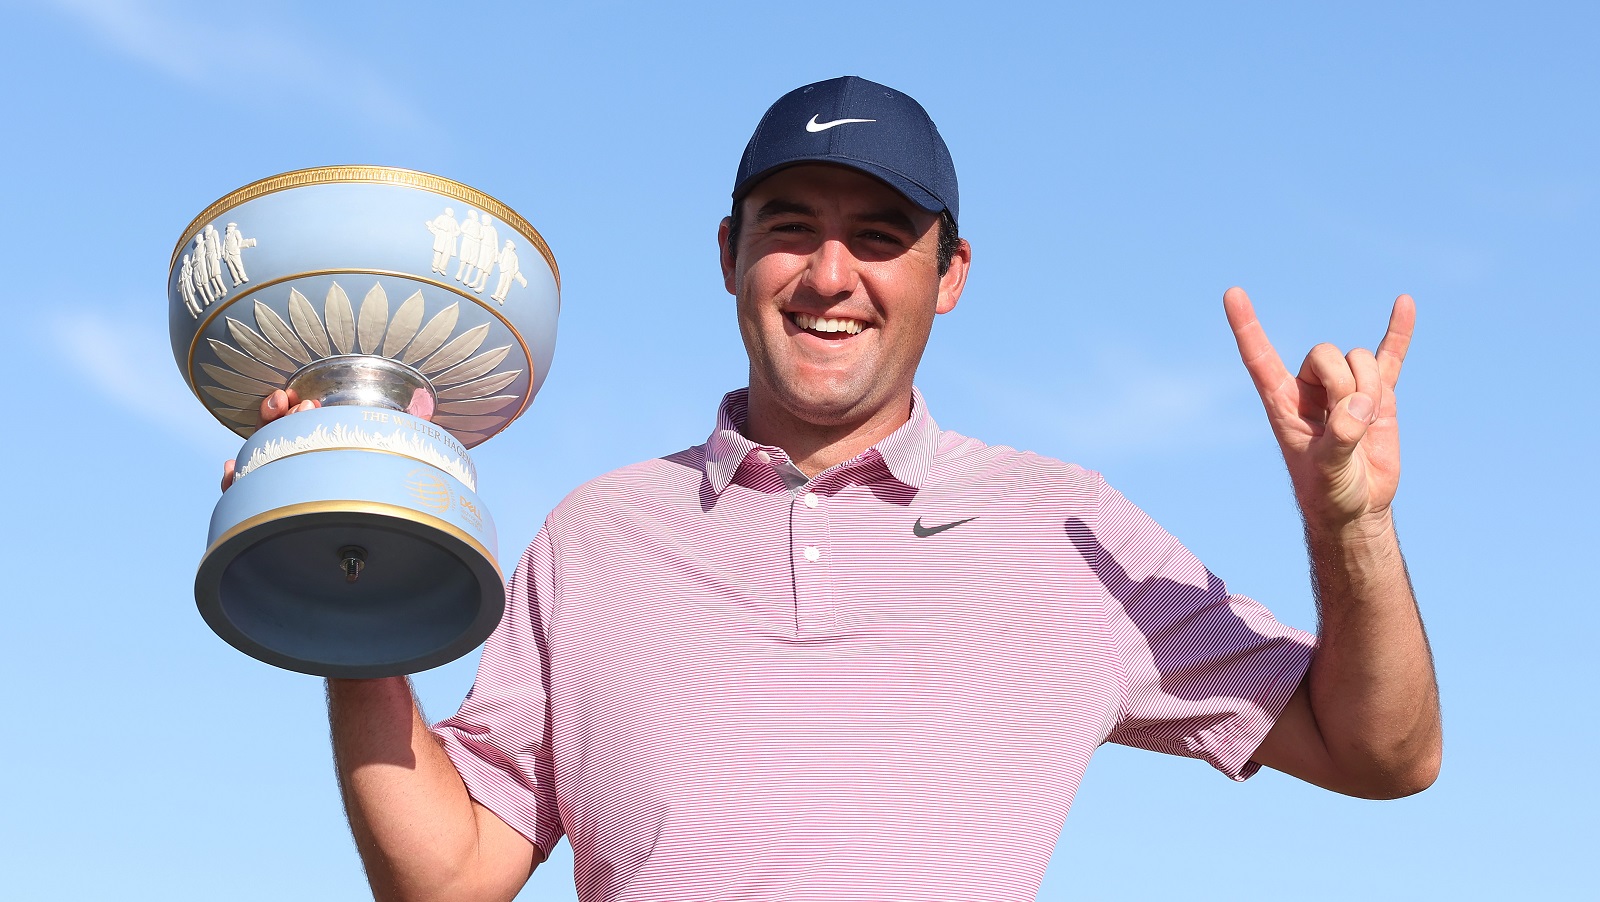 Scottie Scheffler poses with the Walter Hagen Cup after defeating Kevin Kisner in their finals match to win the World Golf Championships-Dell Technologies Match Play at Austin Country Club on March 27, 2022.